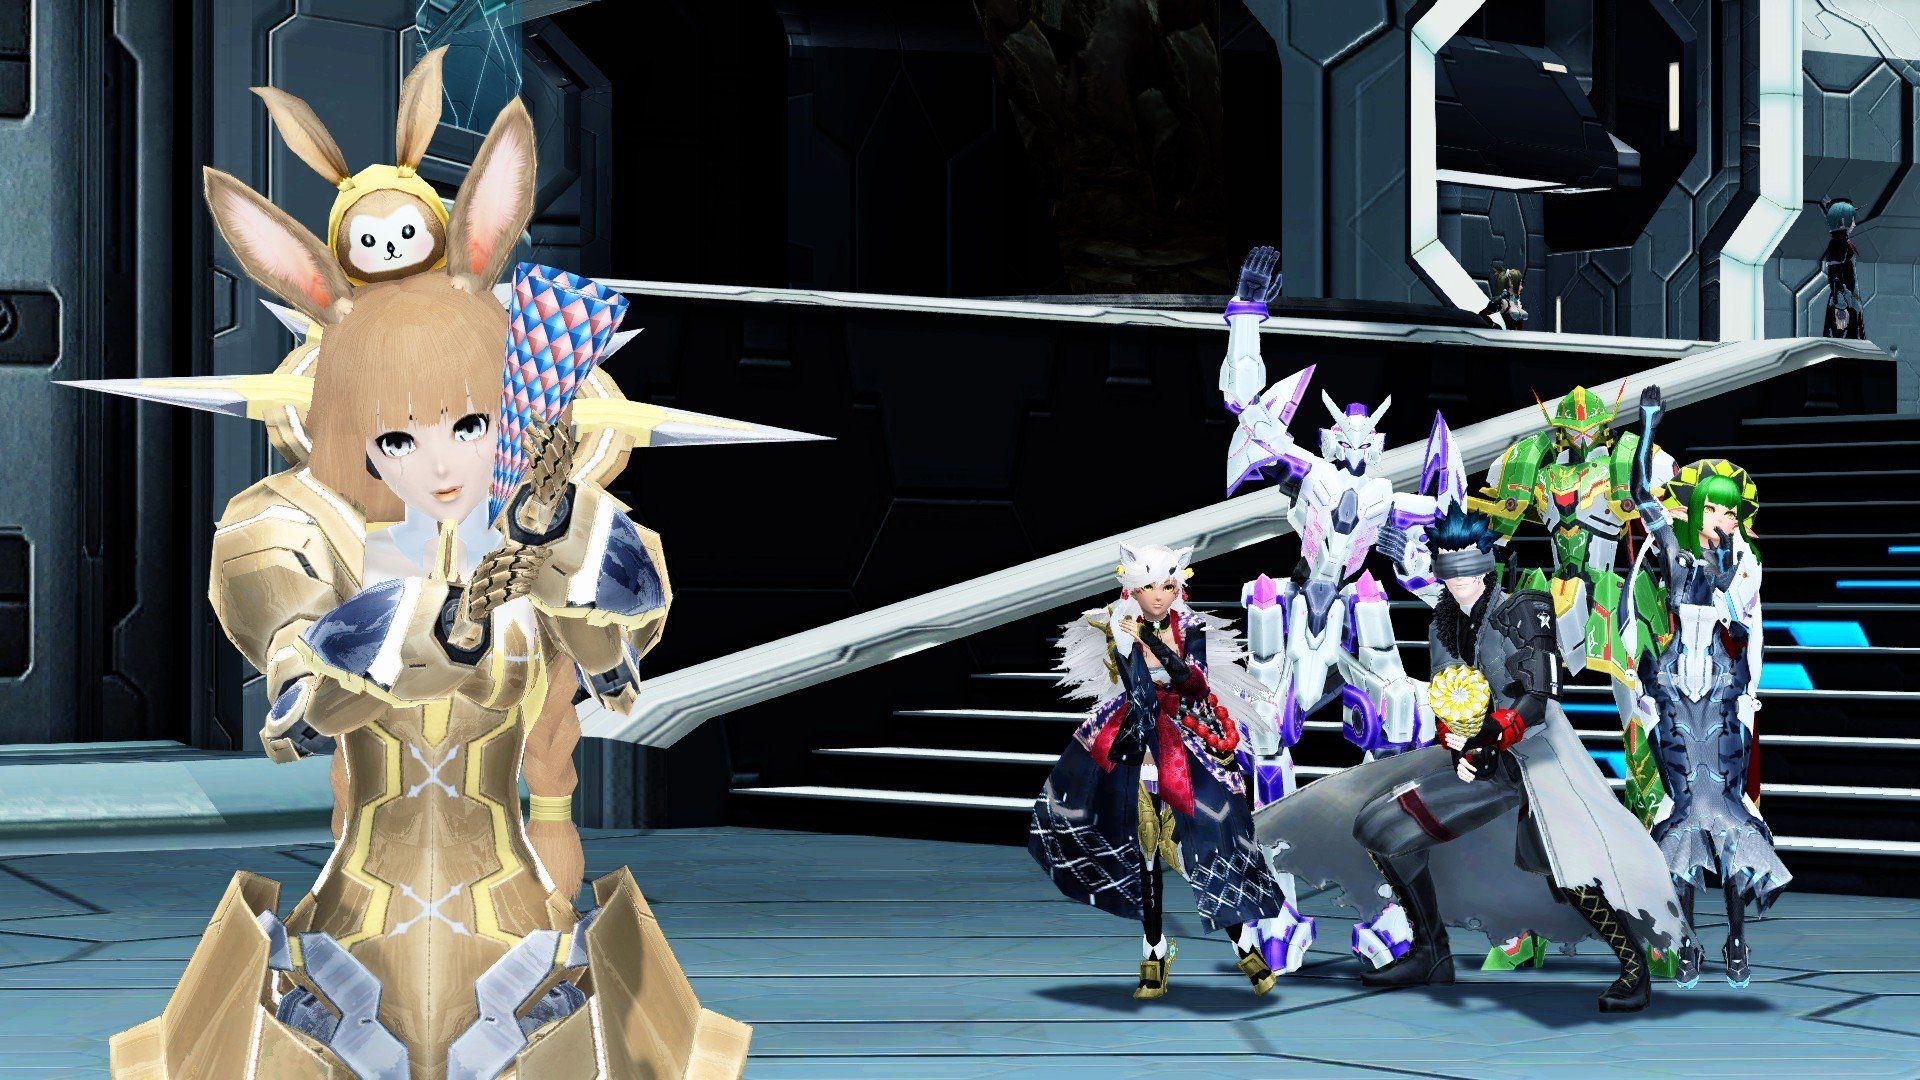 Sega announces that the western launch of Phantasy Star Online 2 has pushed the game past one million users